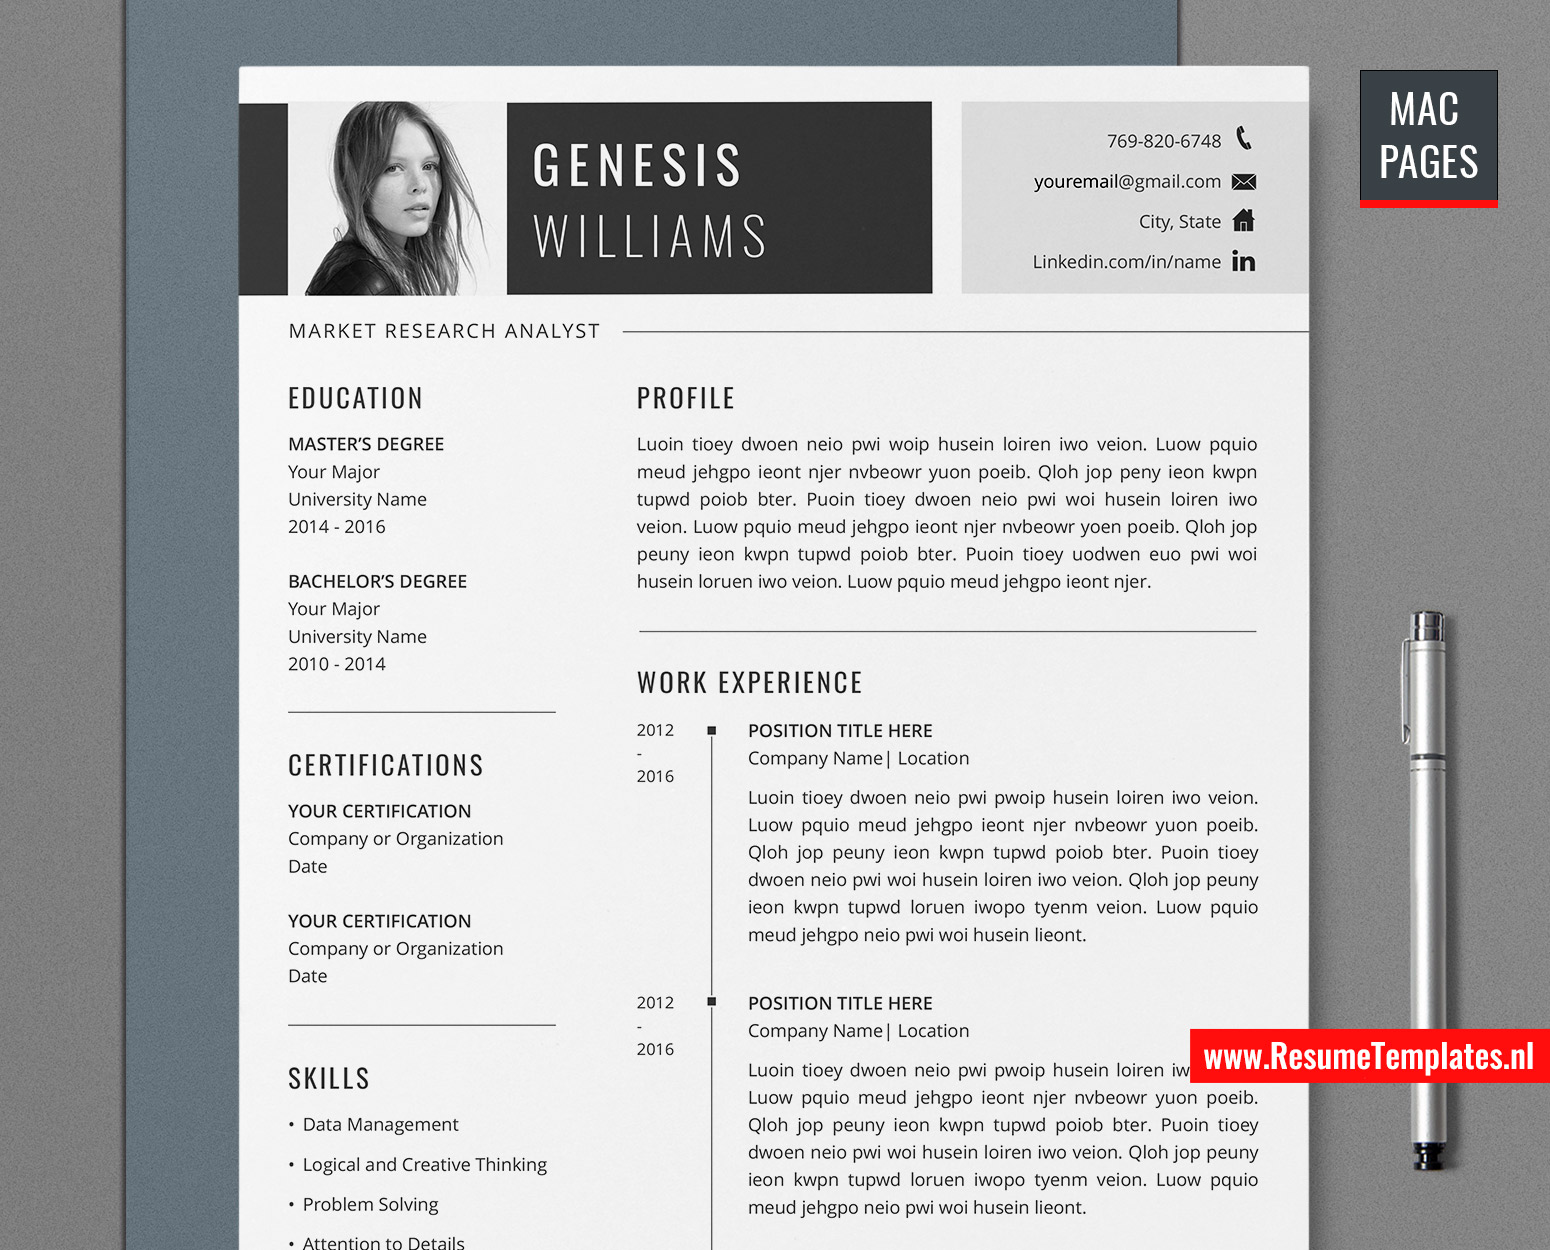 For Mac Pages Professional Resume Template / CV Template for Mac Pages